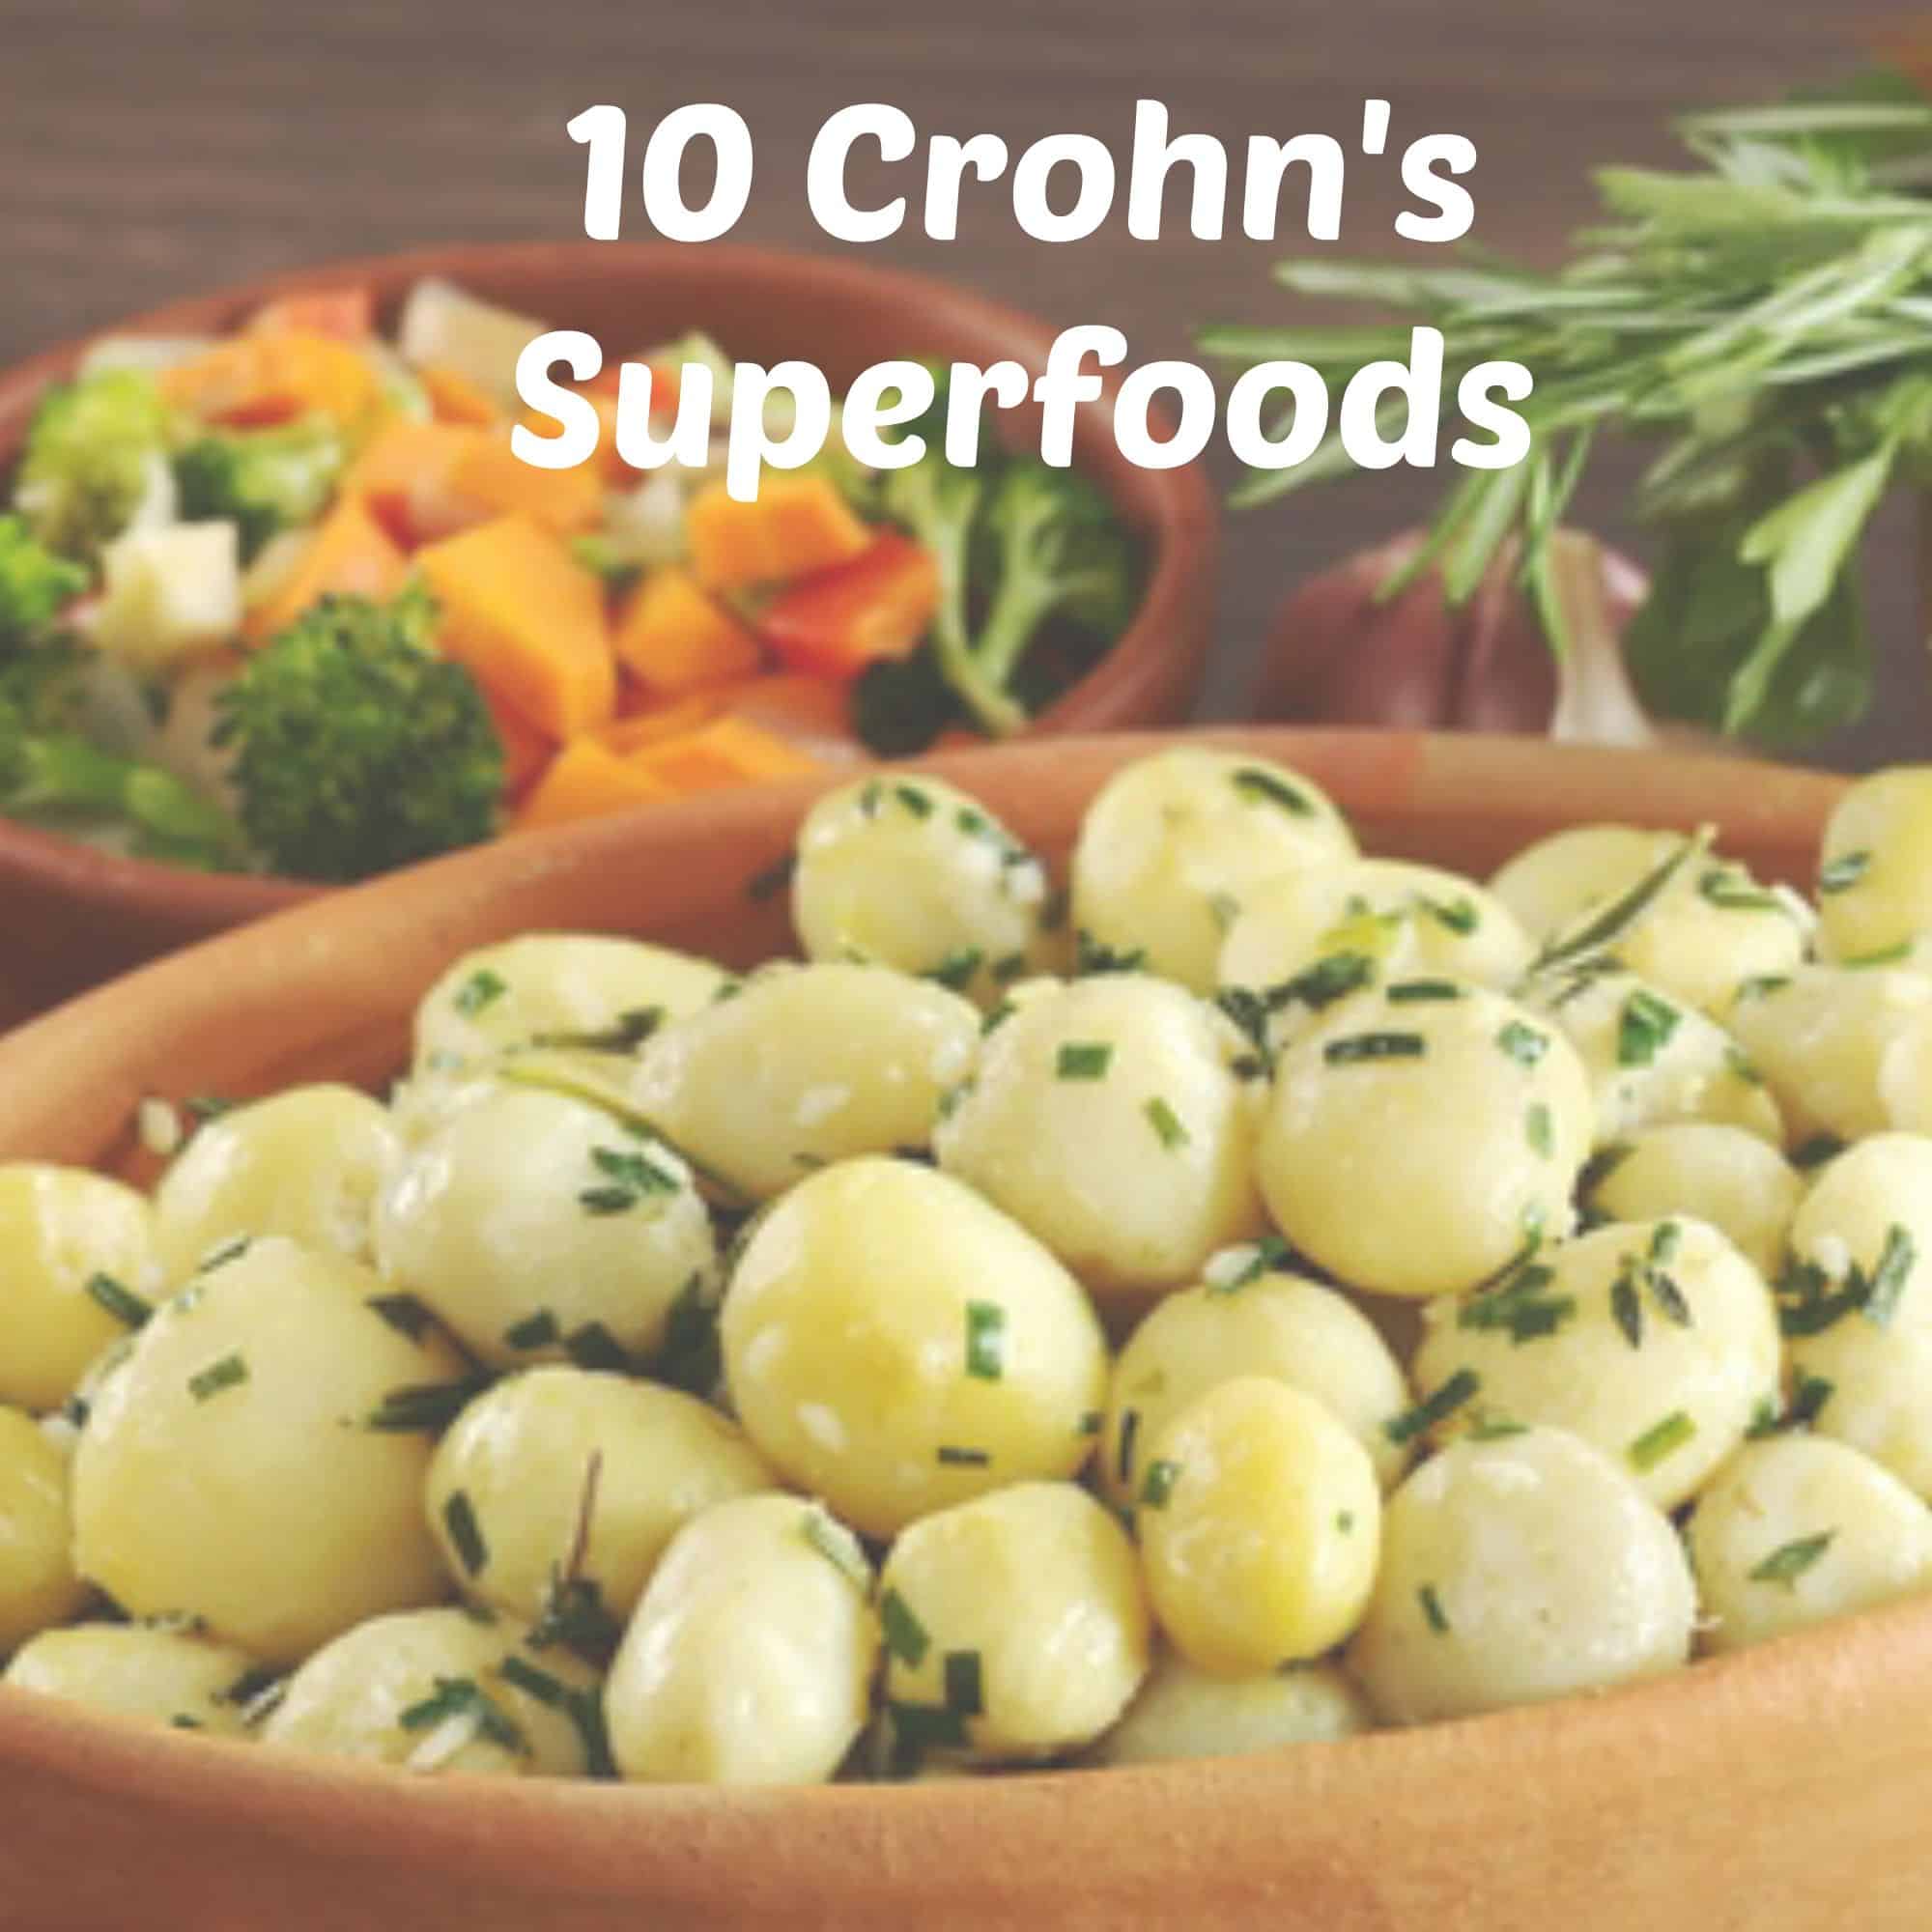 7 Foods to Eat During a Crohnâs Flare